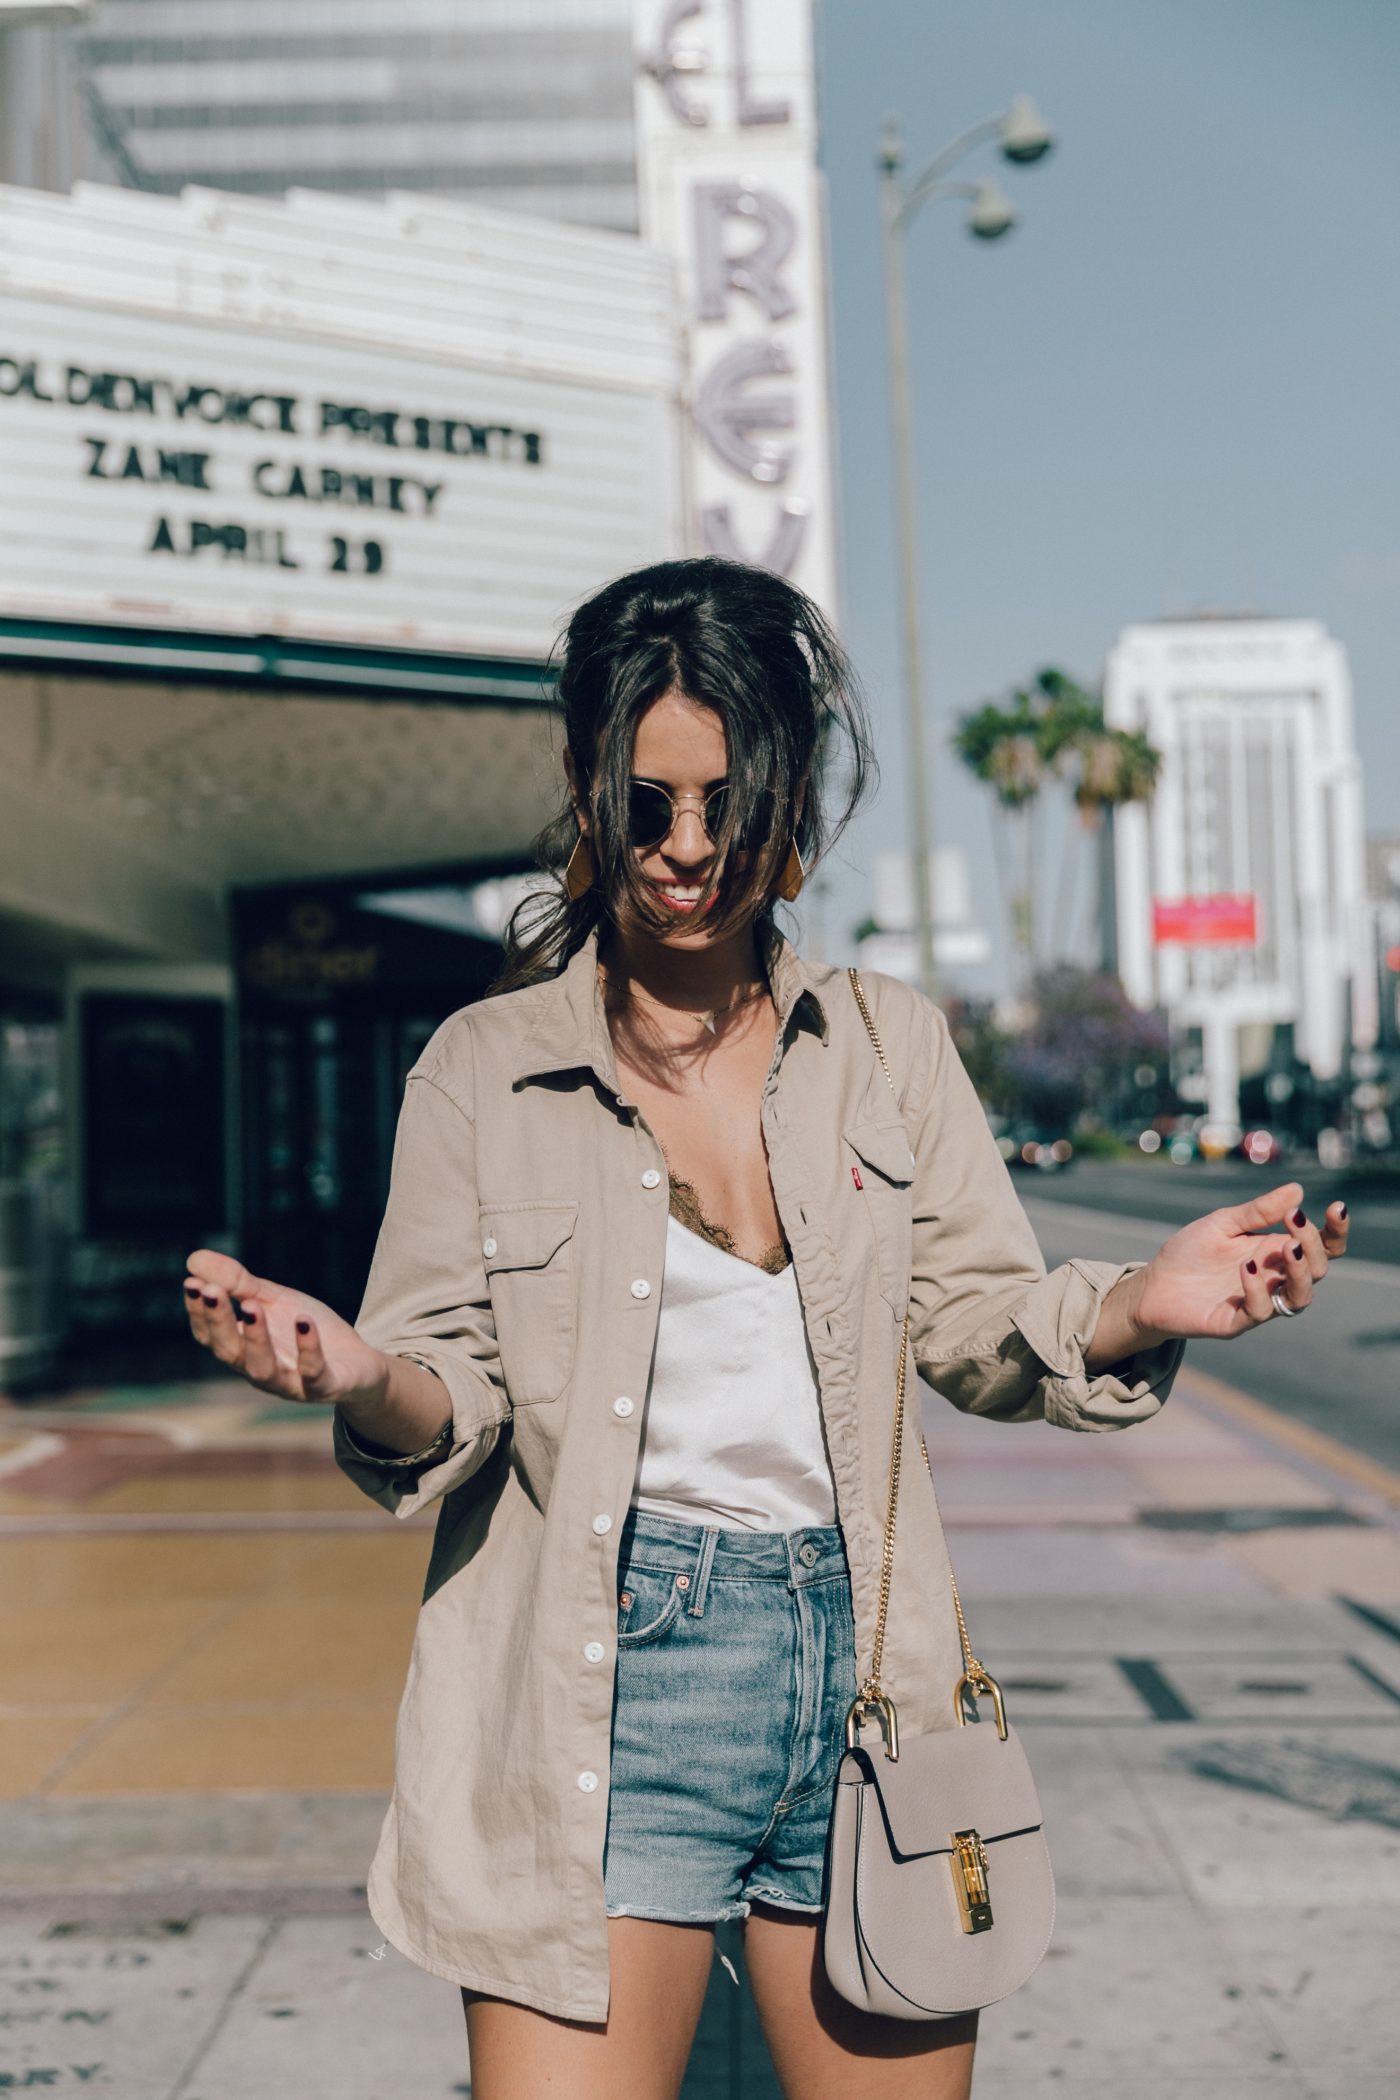 Levis_Shirt-GRLFRND_Denim-Chloe_Bag-Los_Angeles-Shorts-Outfit-Street_Style-Ray_Ban-Street_Style-Collage_Vintage-34